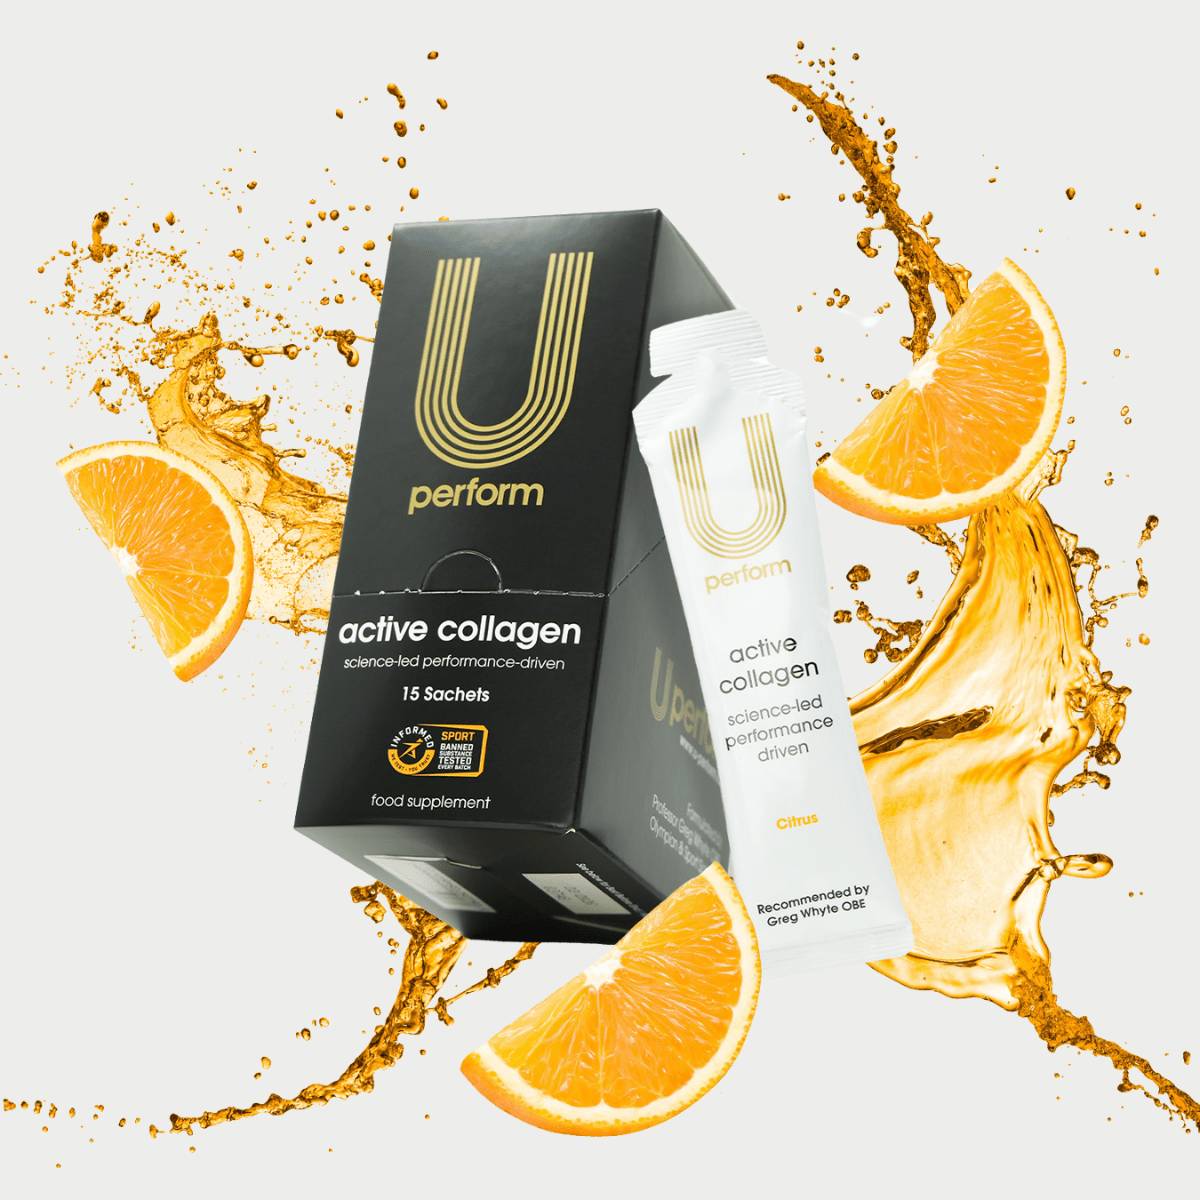 U Perform Active Collagen box and gel sachet with a splash of orange juice and slices behind to represent the citrus flavour